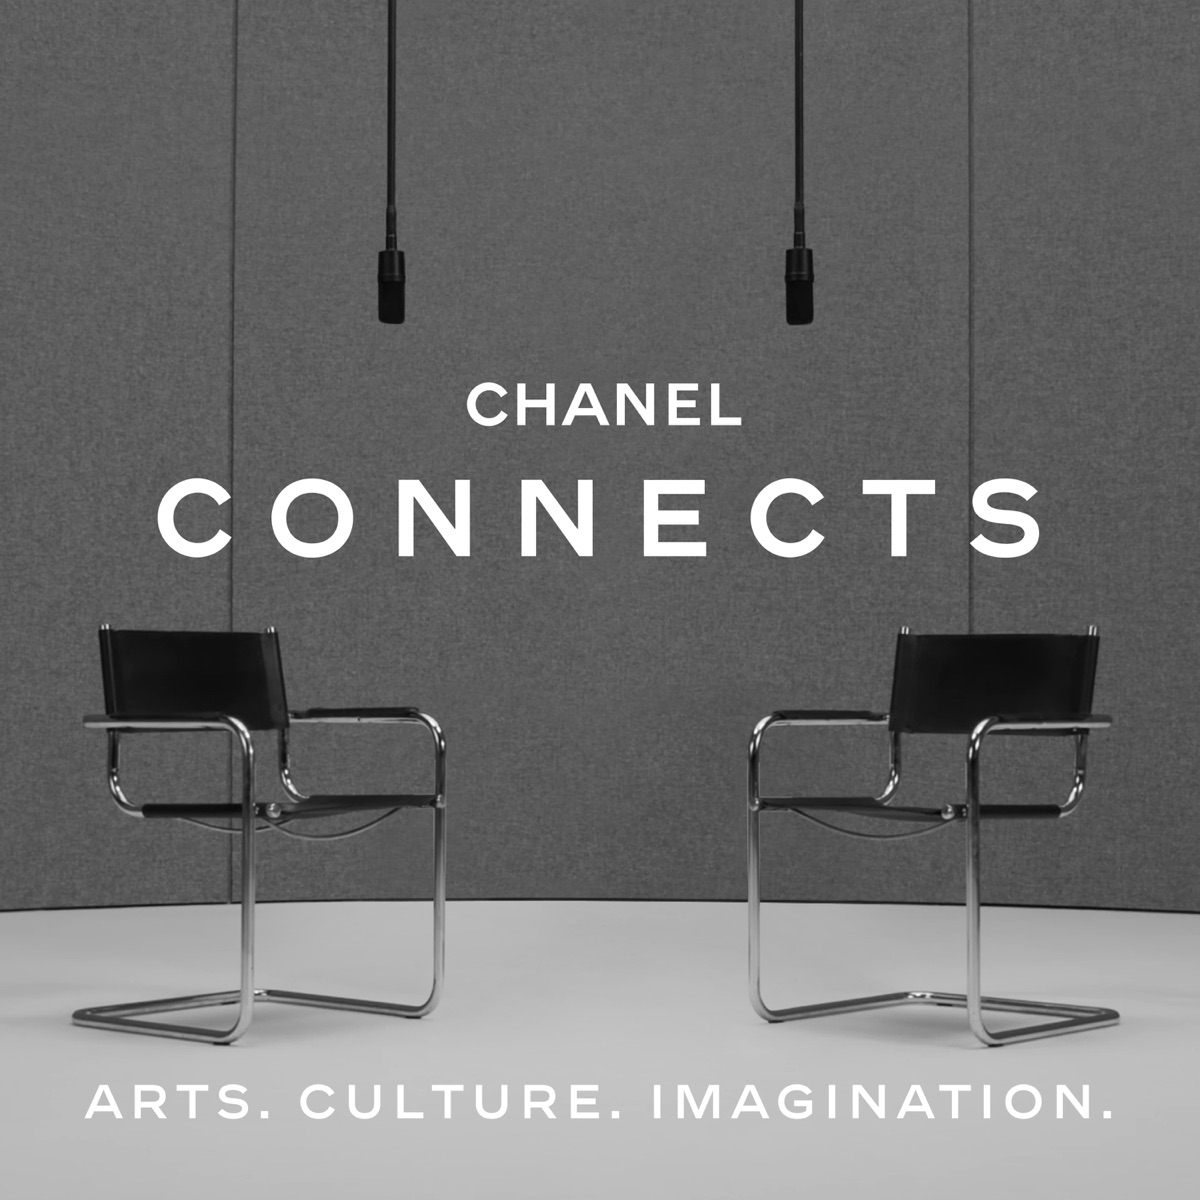 G-Dragon, Hong Kyung-pyo share creative vision in 'Chanel Connects